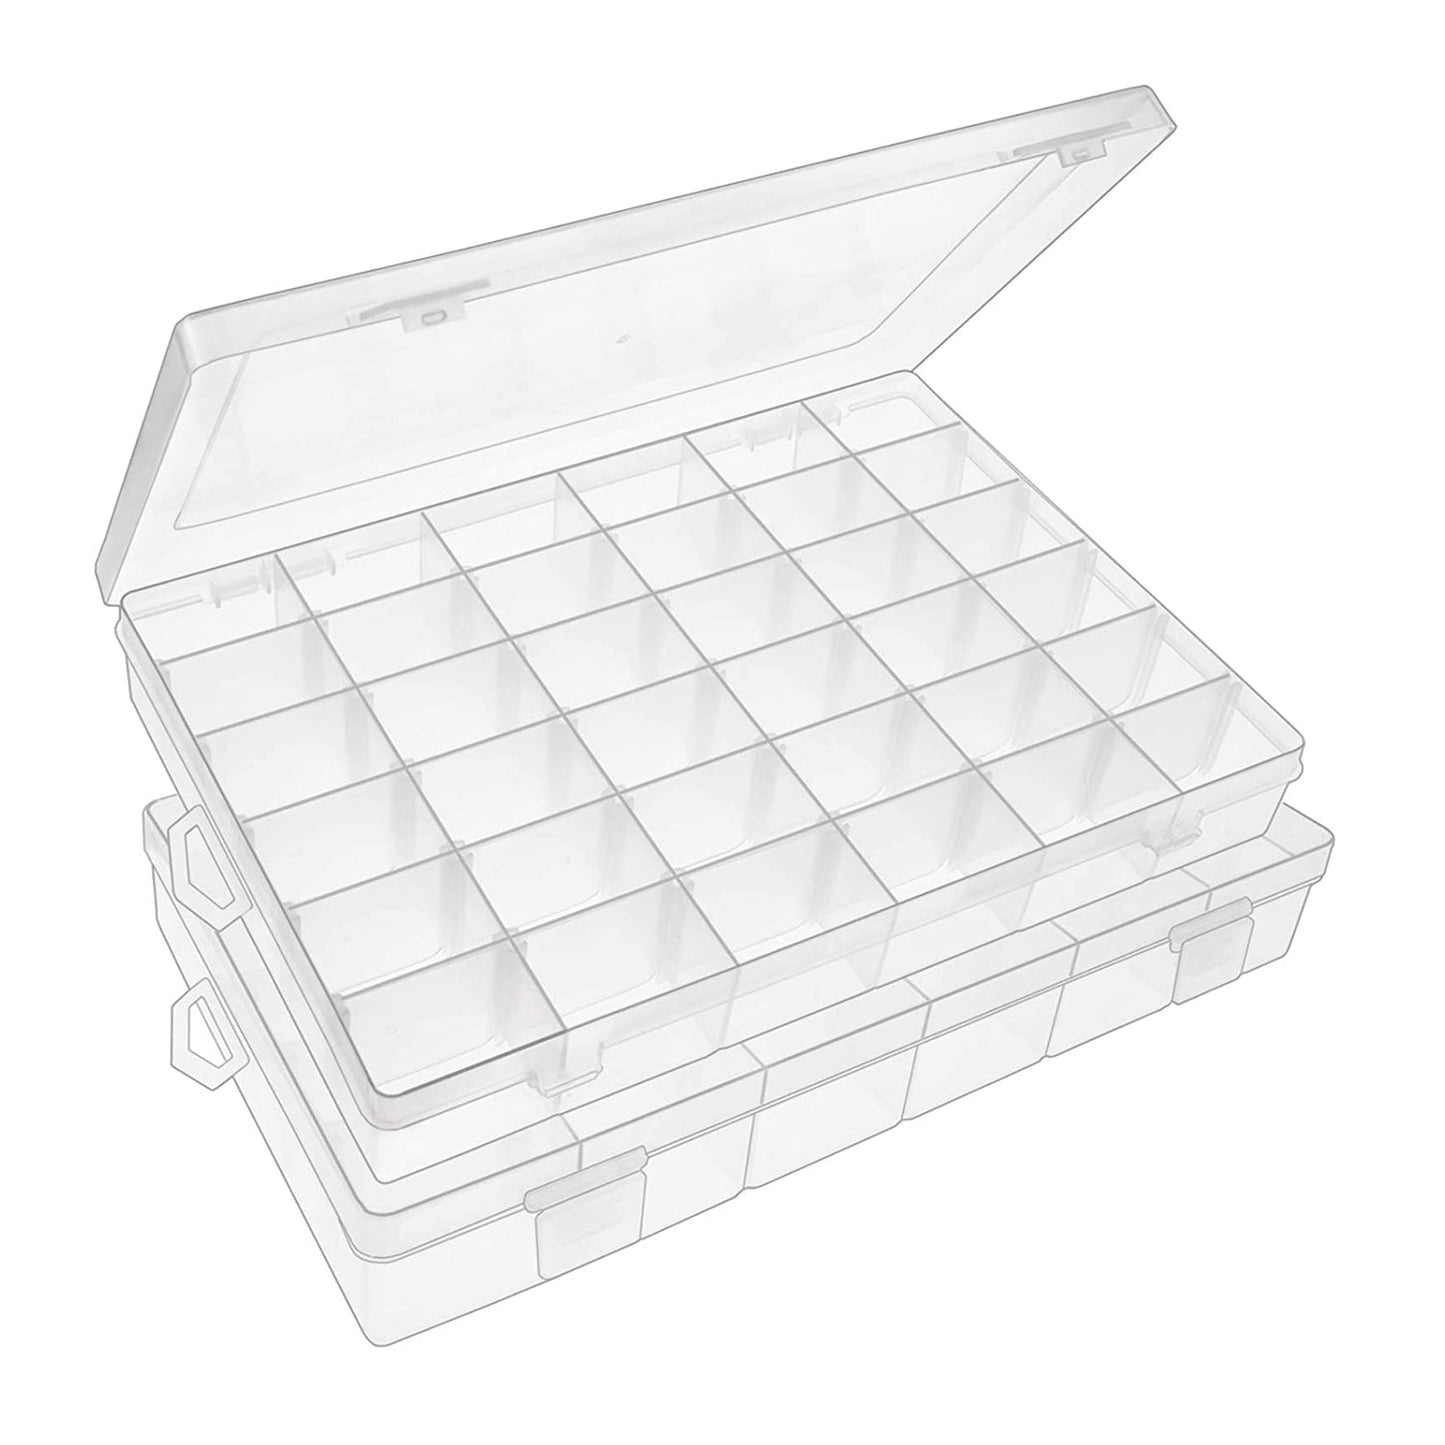 7673  36 Grids Clear Plastic Organizer Box with Adjustable Compartment Dividers, Jewellery Storage Organizer Collection Box (1 pc ) DeoDap